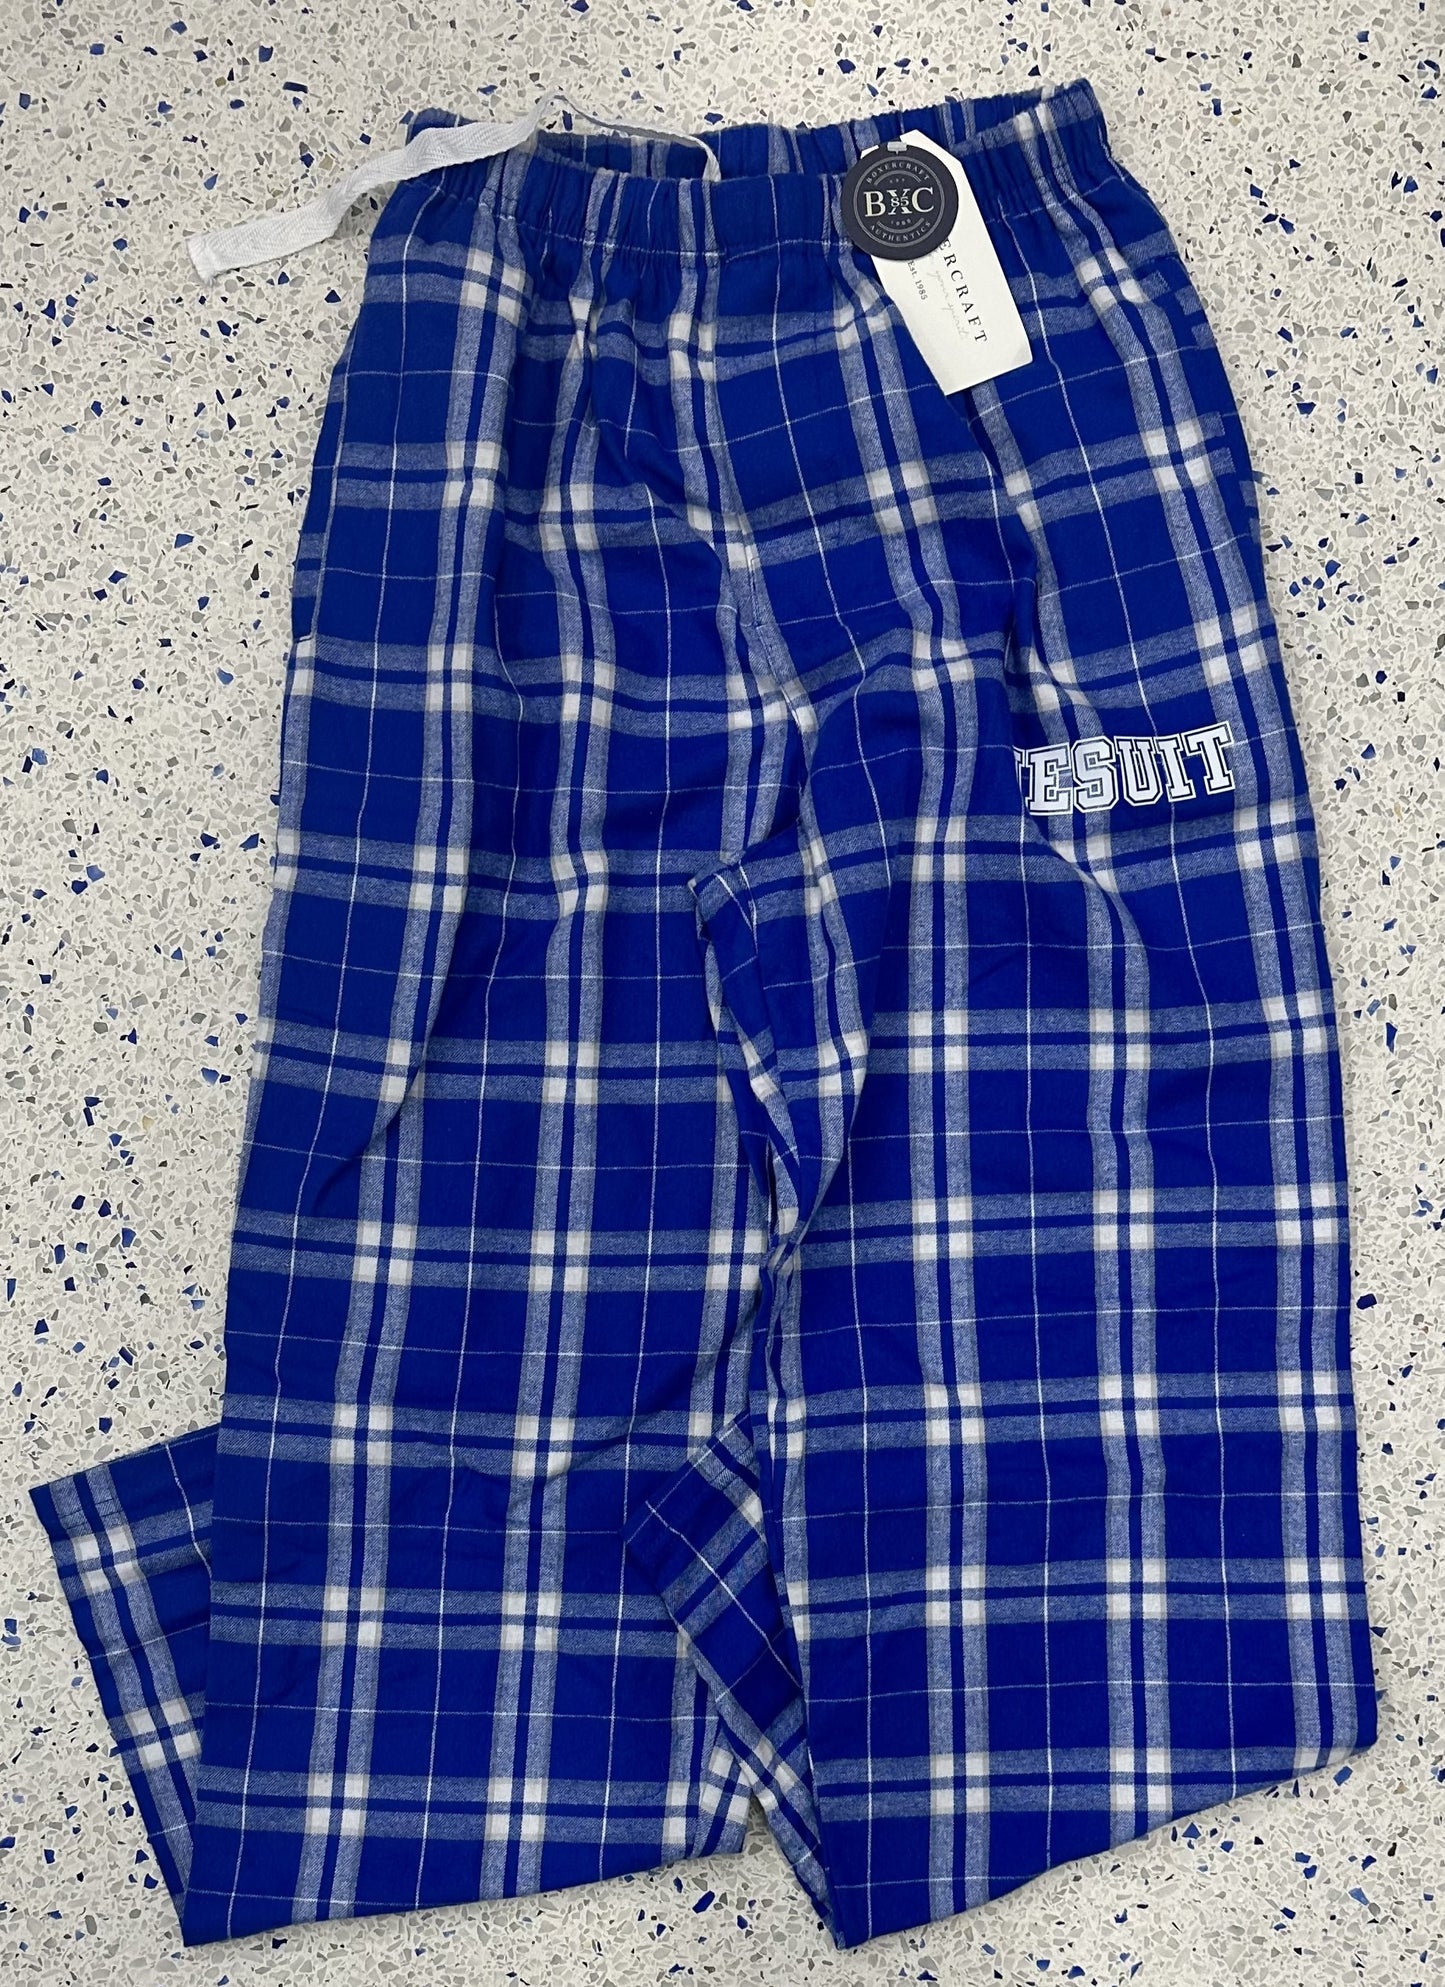 Boxercraft.  100% cotton flannel, 4.3 ounce.  Self-folded waistband (with inner drawcord), hidden button-close fly.  Also has pockets.  These flannel pants will keep you warm and comfortable with double-brushed cotton softness.  JESUIT screenprint logo.